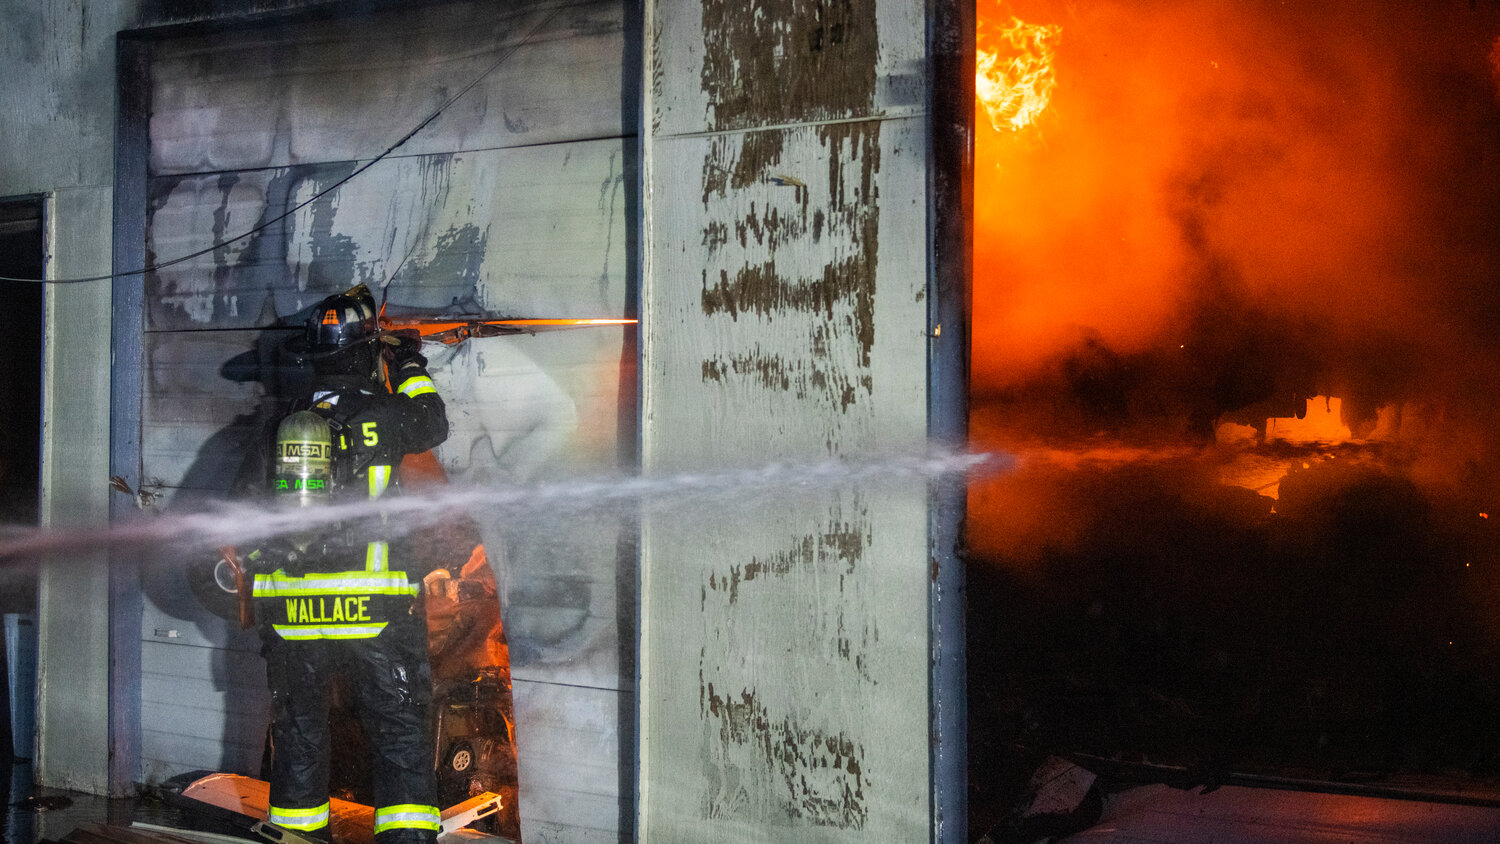 Lewis County Fire District 5 firefighter Wallace cuts through a garage door as crews battle flames inside a structure near the 100 Block of Alder Avenue Northwest in Napavine on Saturday, June 3.